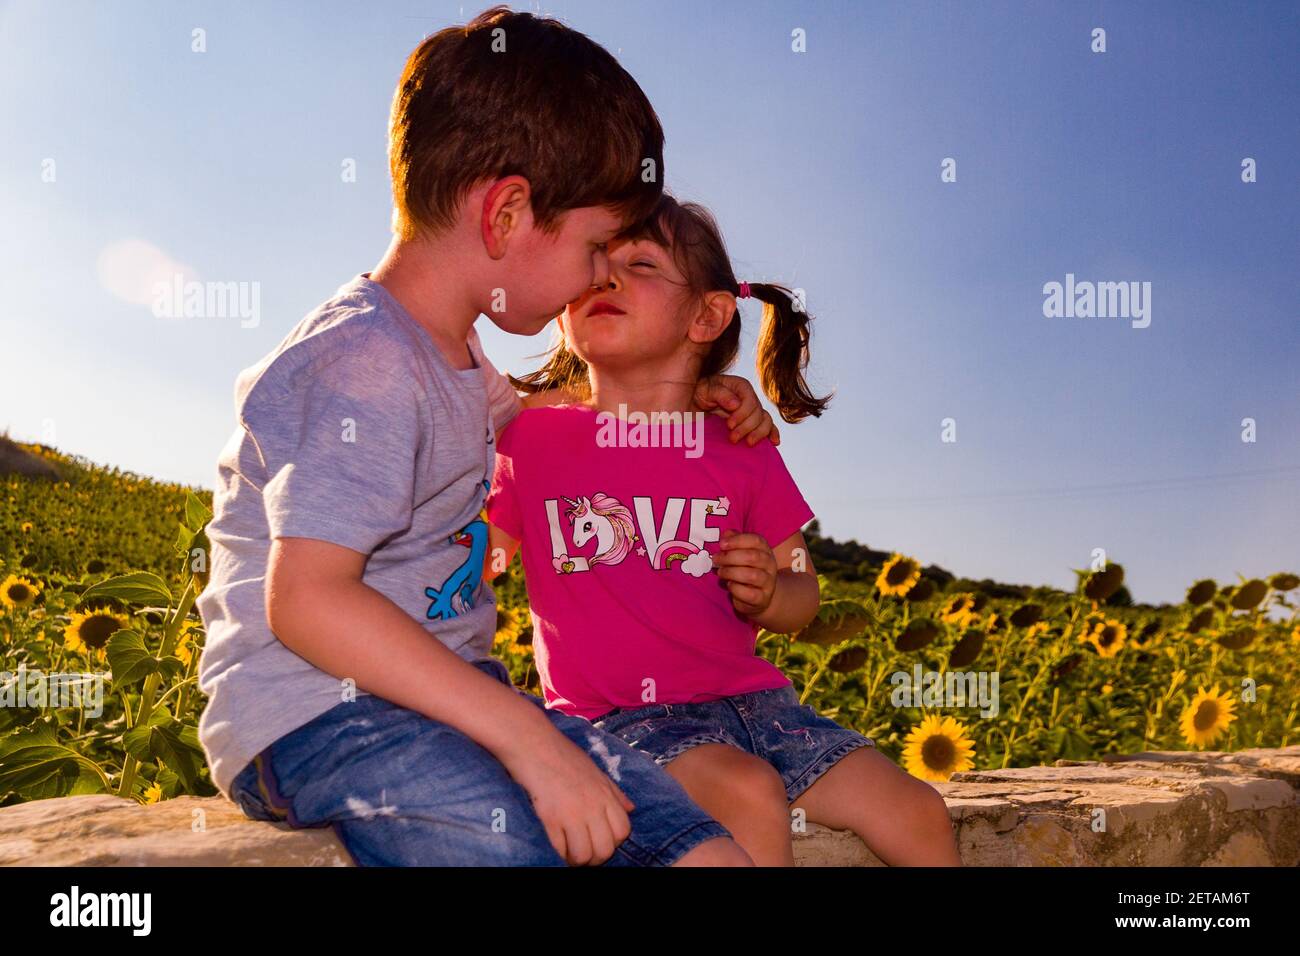 https://c8.alamy.com/comp/2ETAM6T/a-cute-boy-and-a-baby-girl-kissing-in-front-of-a-sunflowers-field-on-a-sunny-day-2ETAM6T.jpg